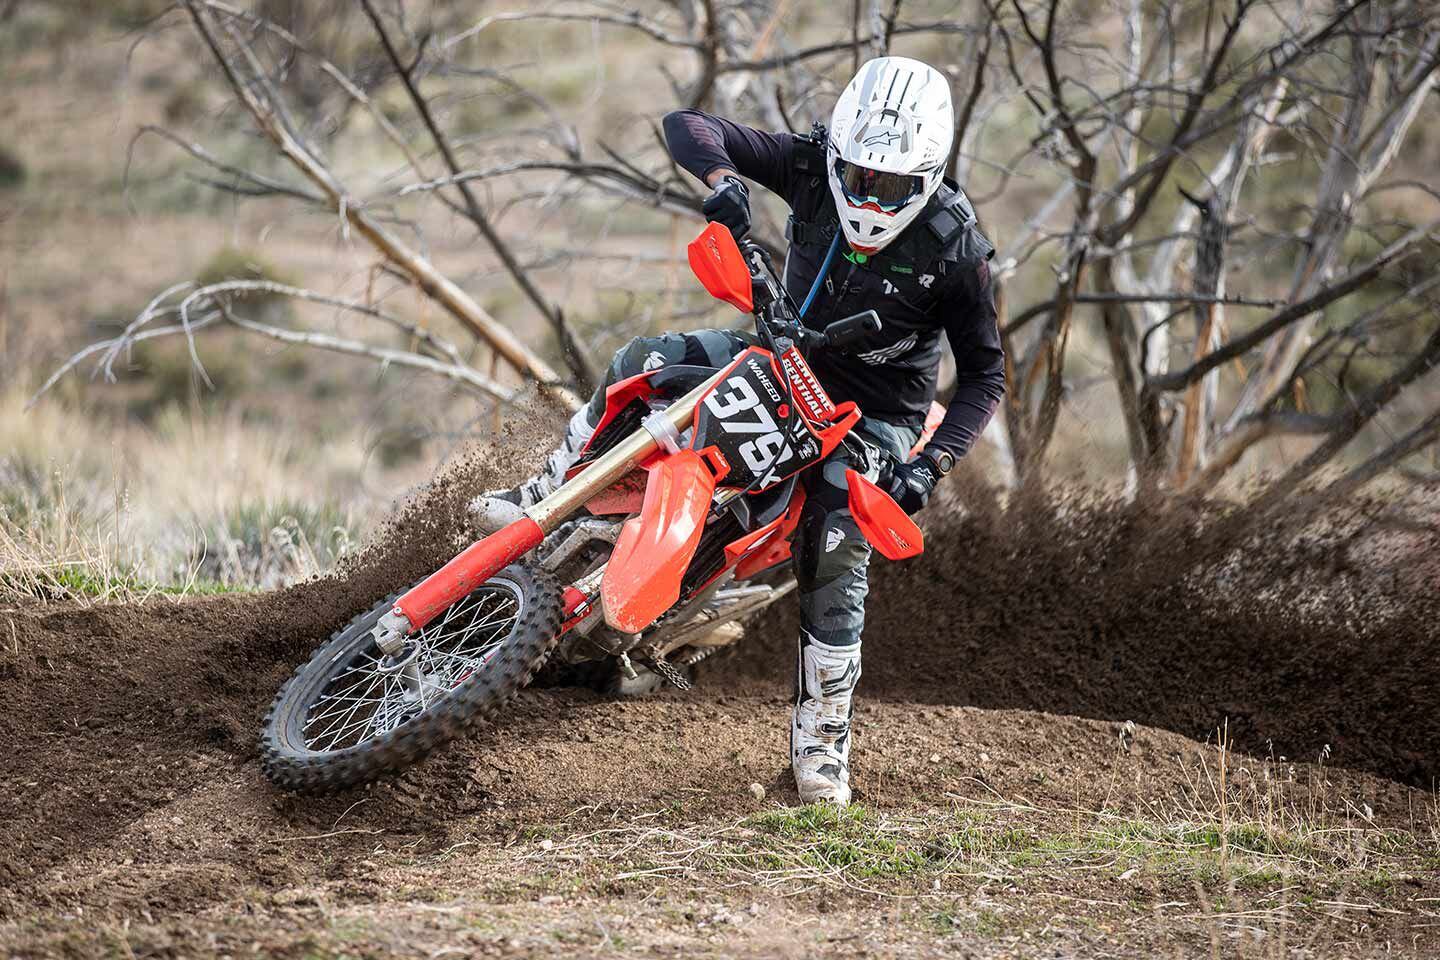 Honda’s CRF250RX appeals to off-road riders seeking a light and easy handling dirt bike.